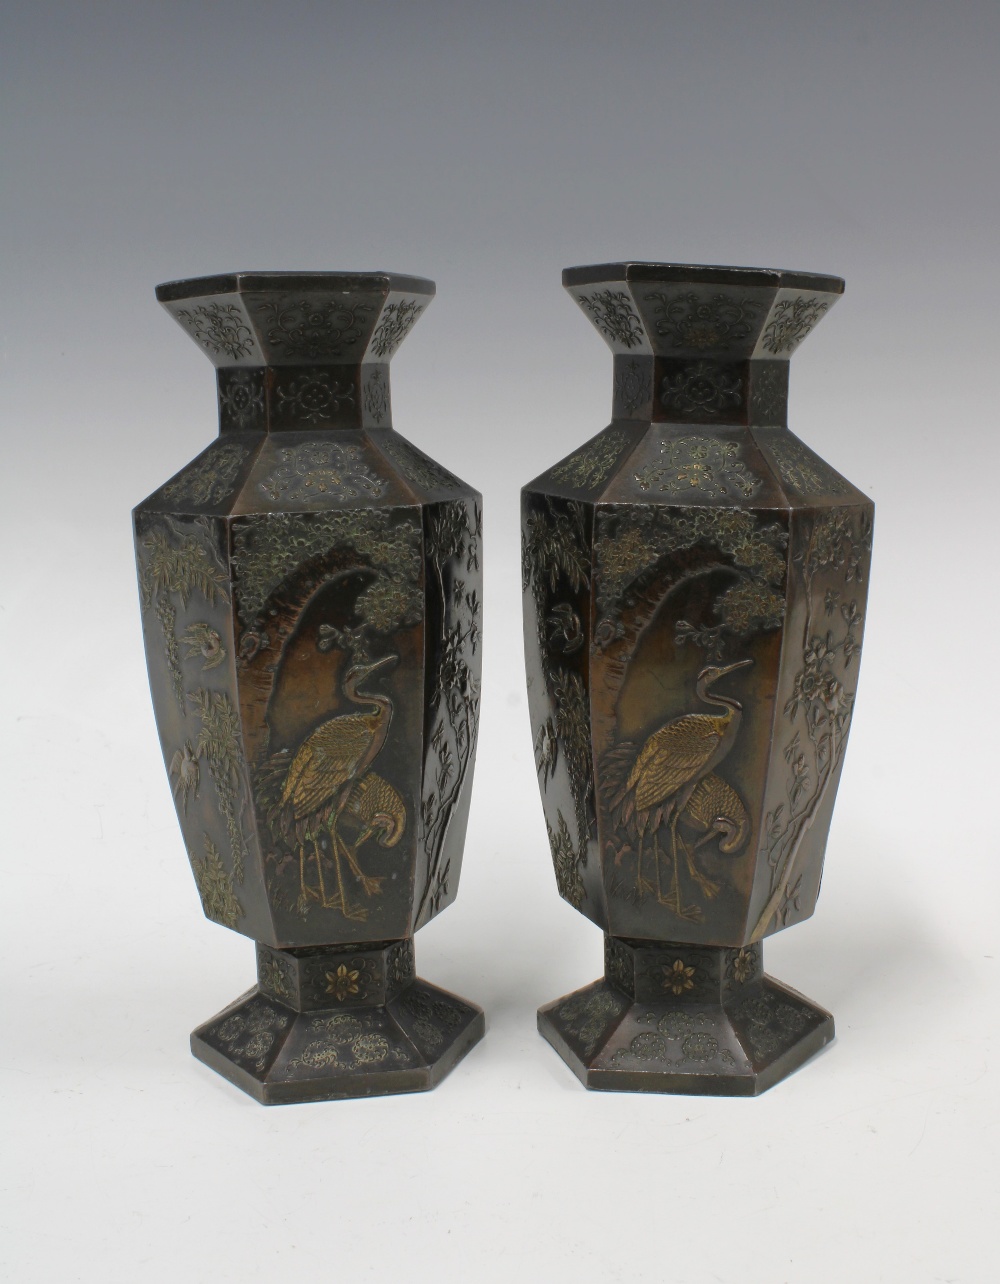 A pair of Japanese bronze patinated metal vases, hexagonal form with relief pattern of storks and